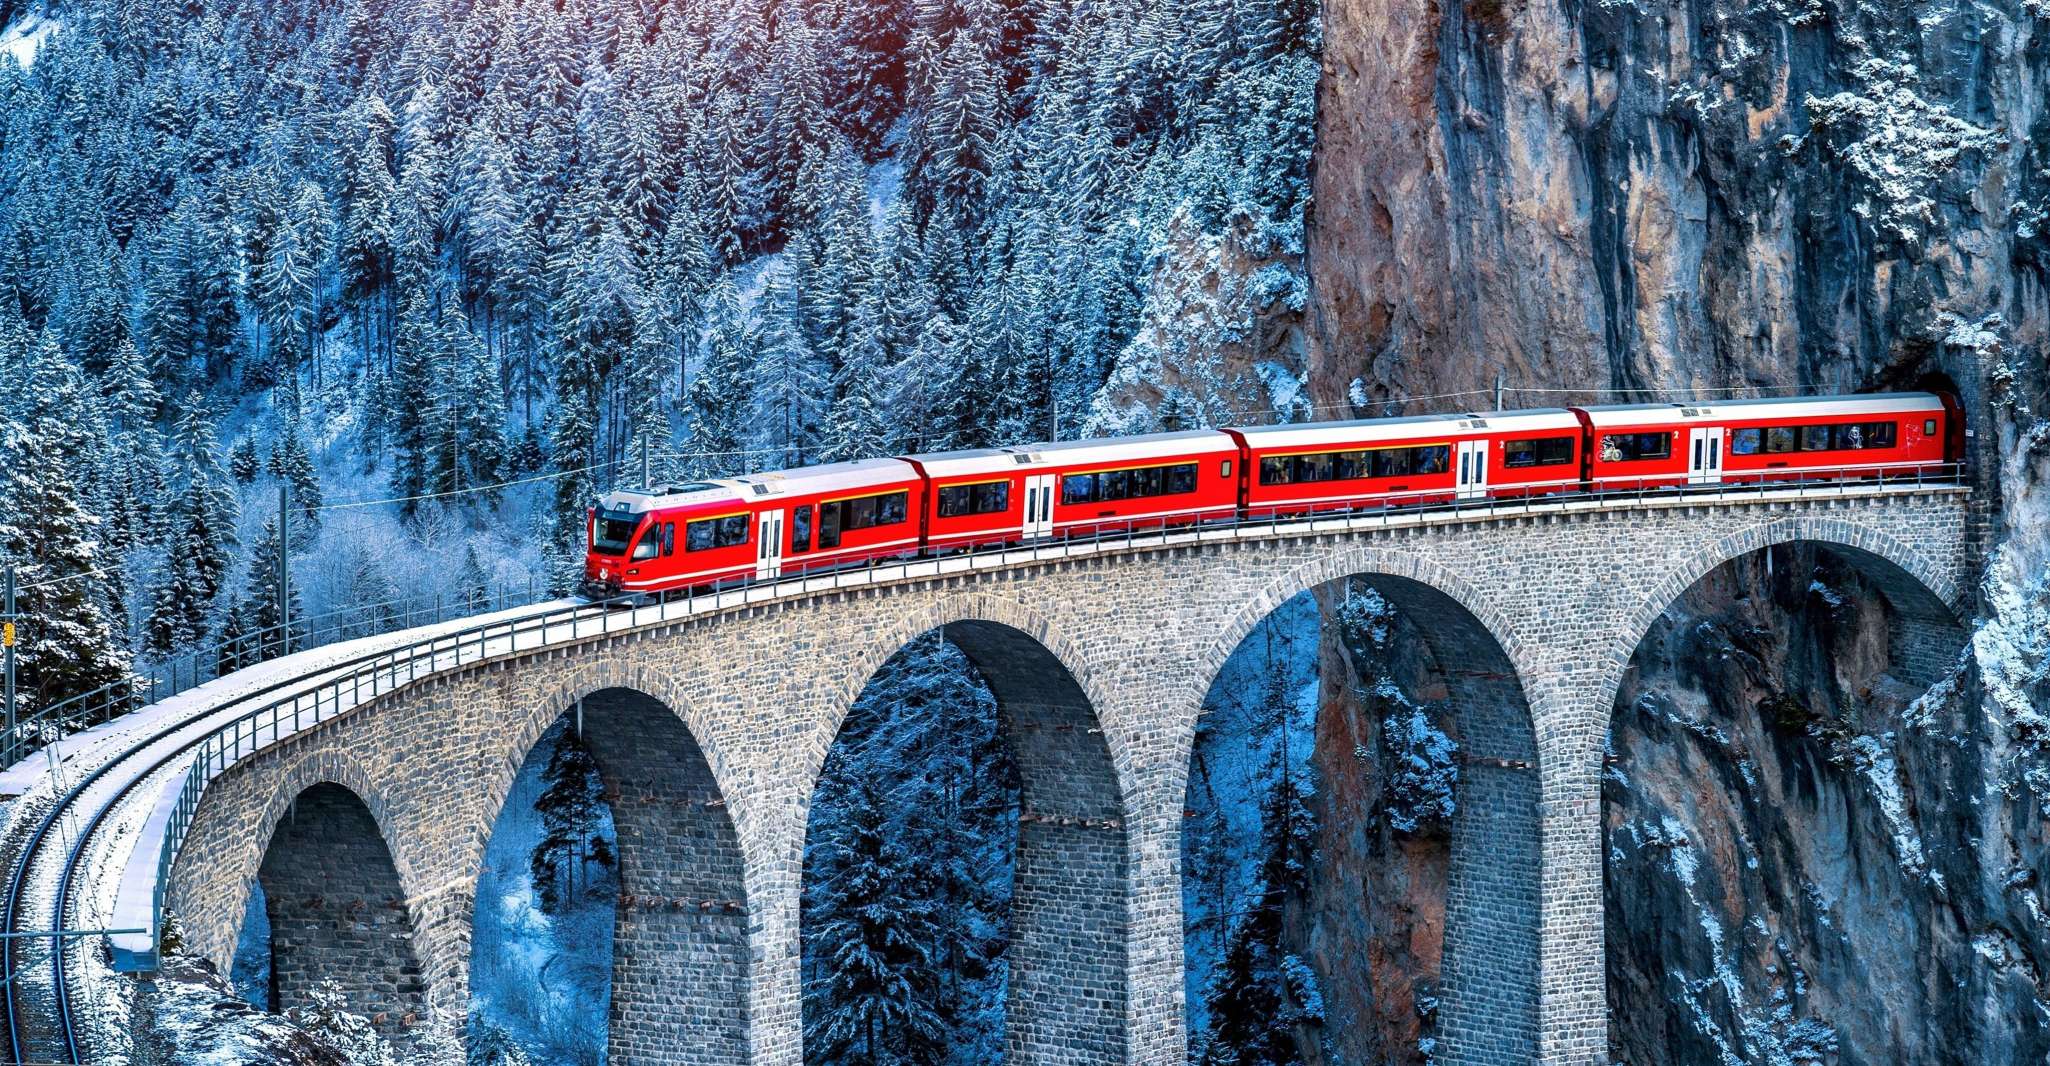 From Milan, St Moritz & Alps Day Trip with Bernina Red Train - Housity